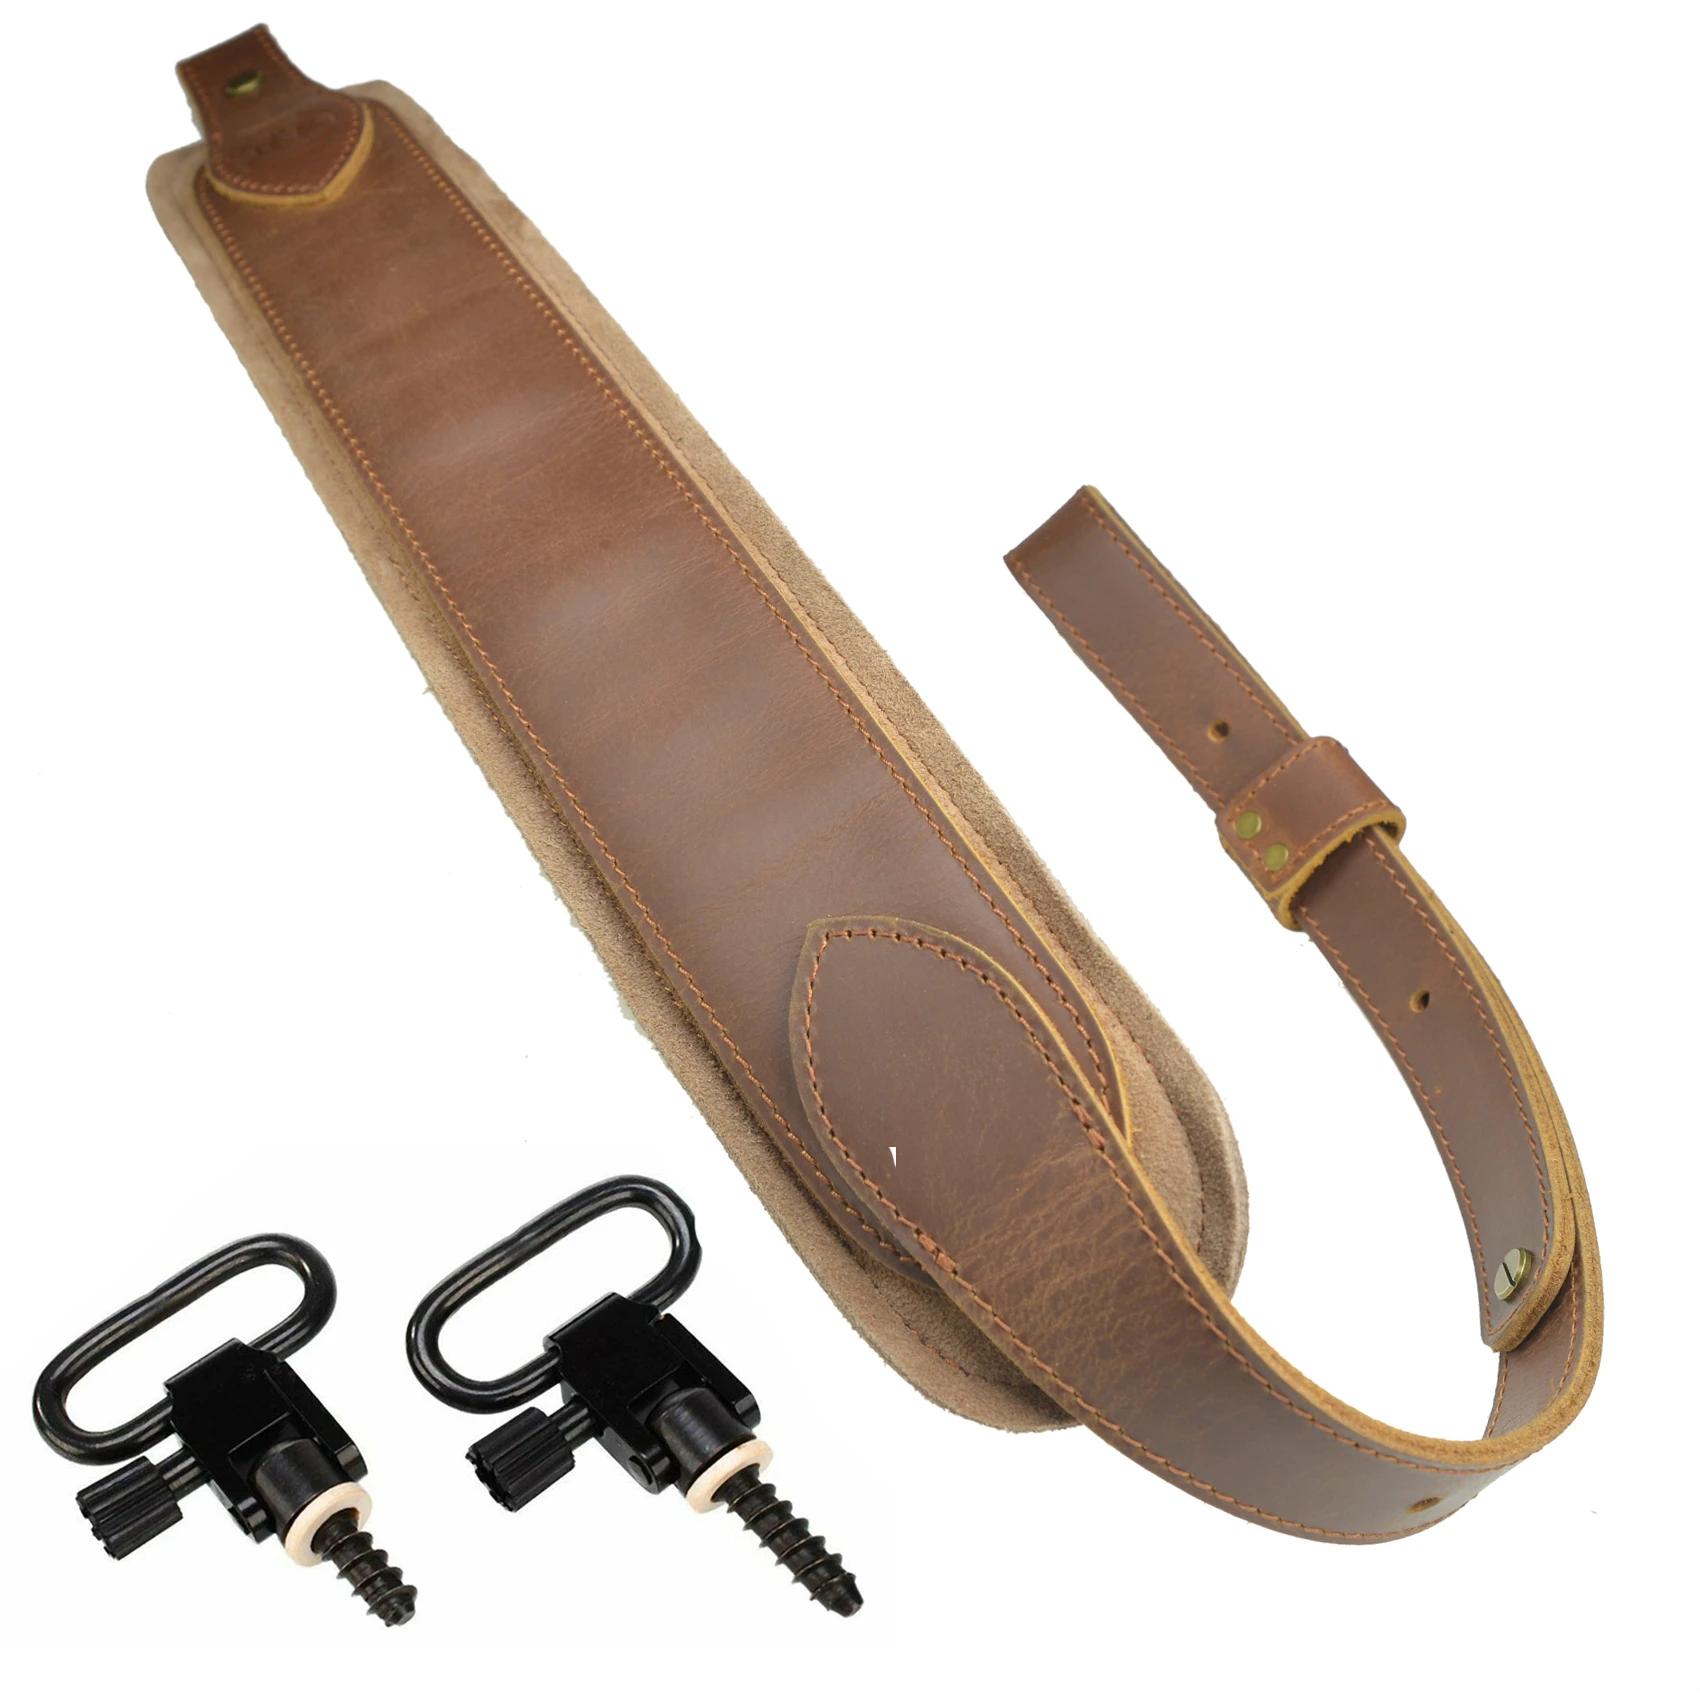 Quality Leather Rifle Shotgun Ammo Sling Hunting Shoulder Strap Made in Europe.